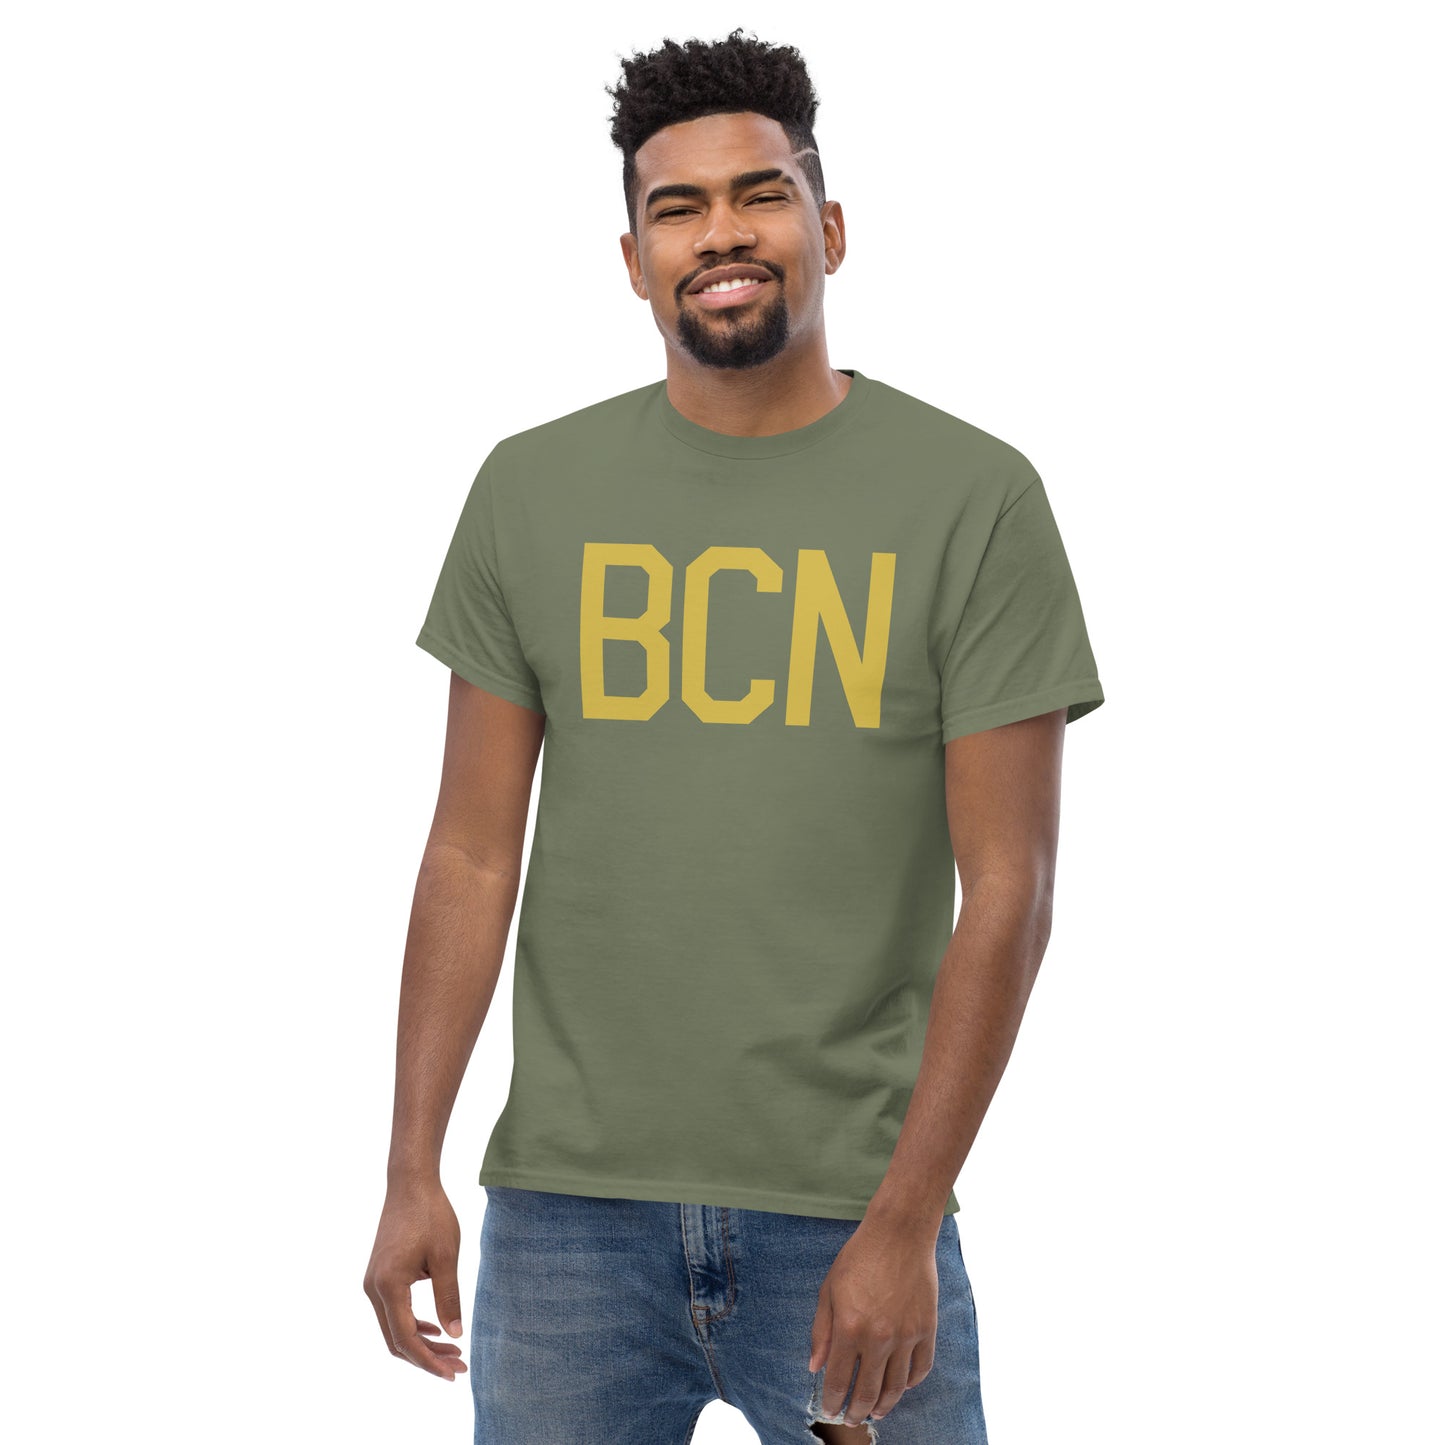 Aviation Enthusiast Men's Tee - Old Gold Graphic • BCN Barcelona • YHM Designs - Image 06